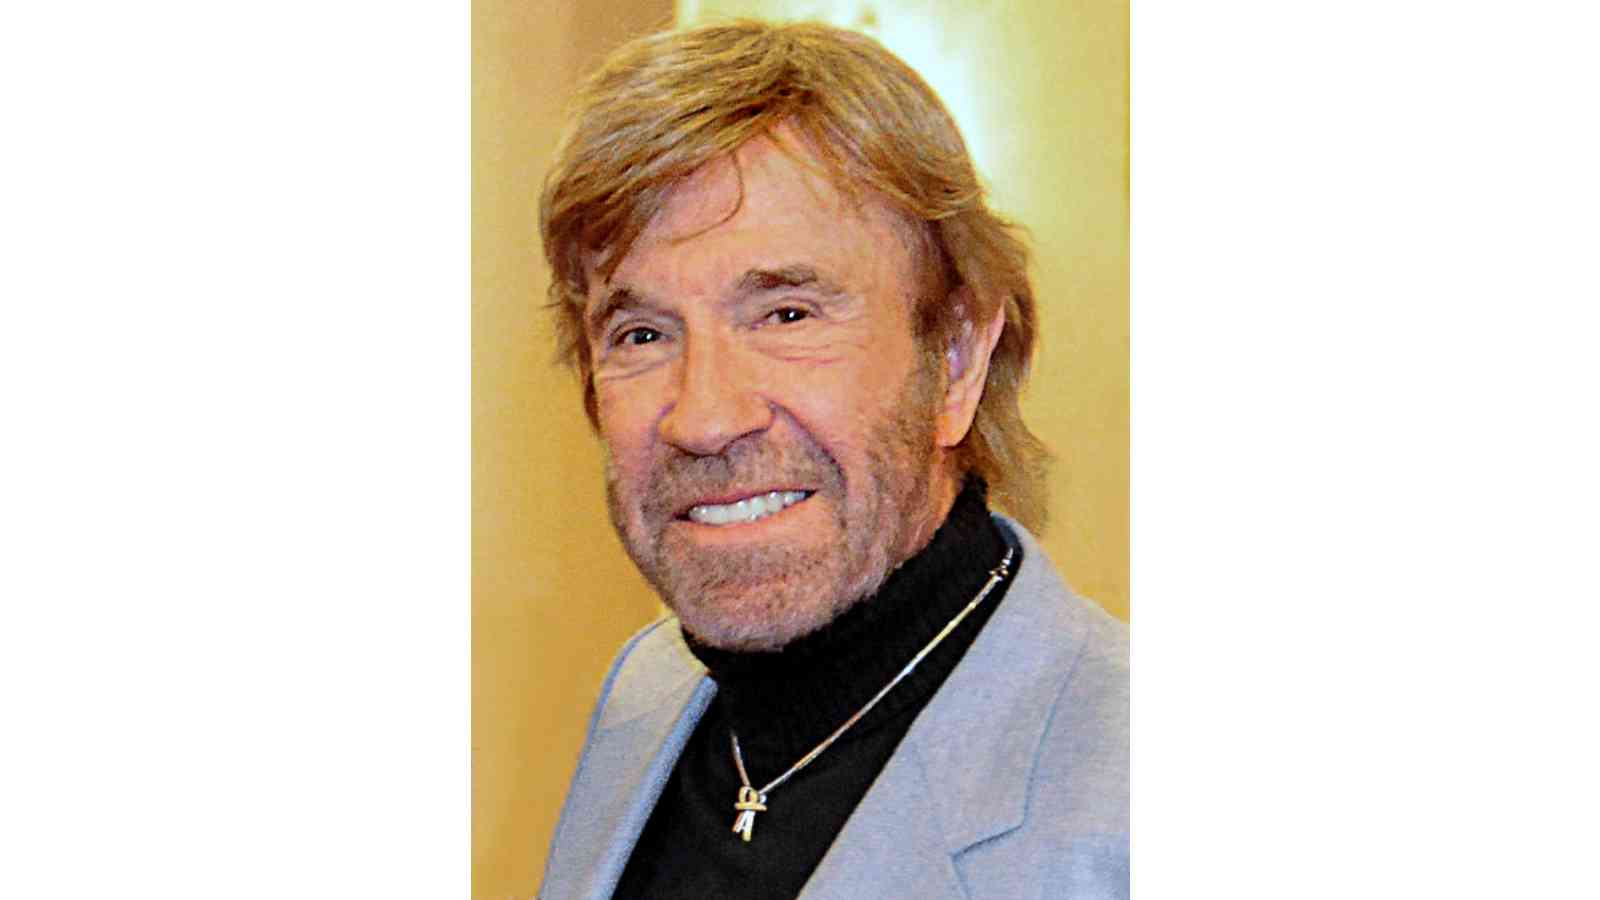 Chuck Norris Biography Age, Height, Birthday, Family, Net Worth